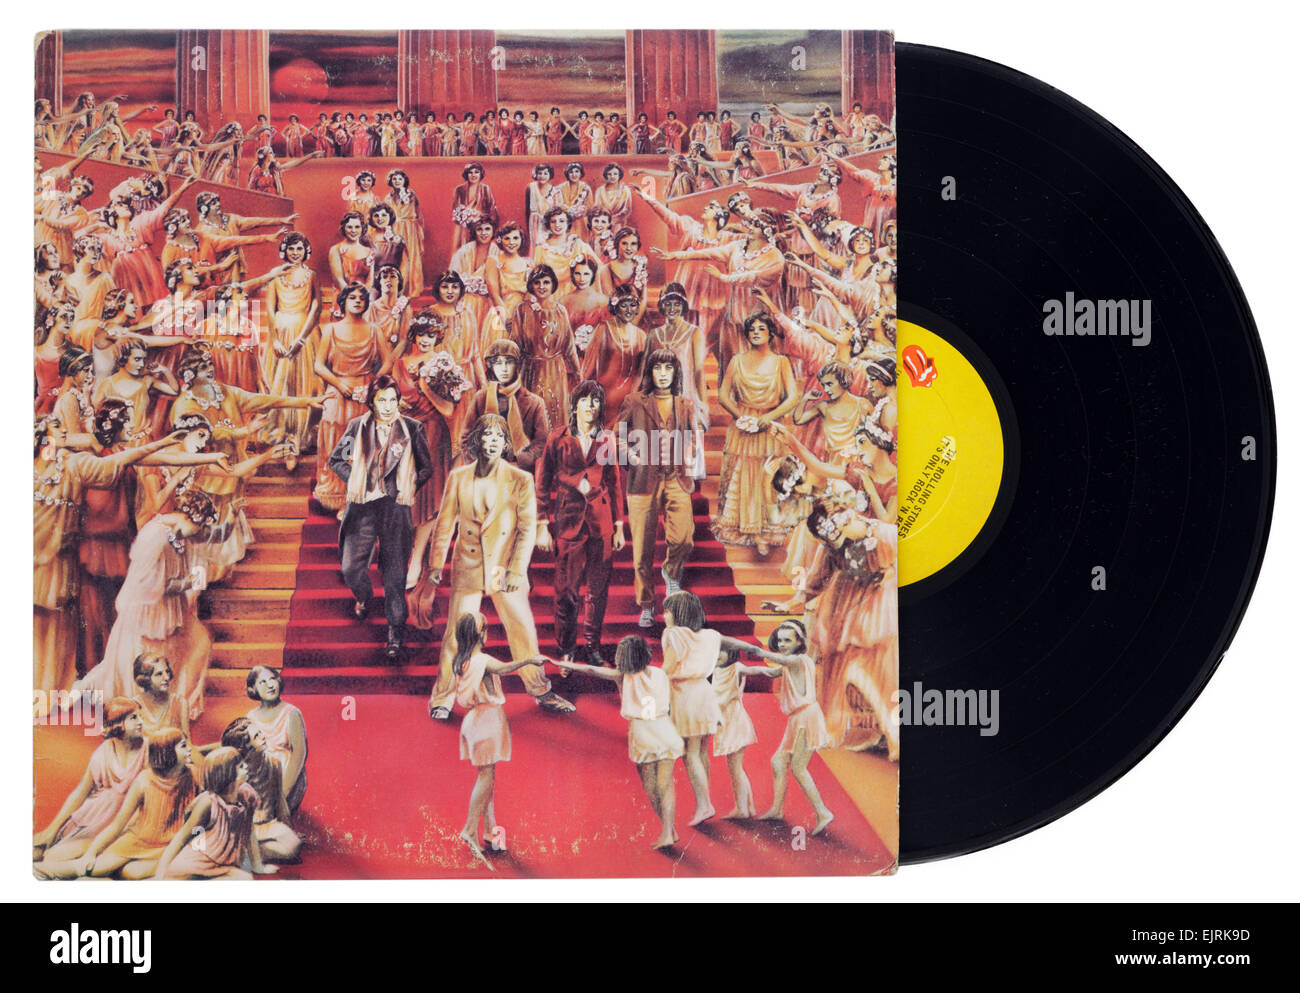 The Rolling Stones Its Only Rock 'n' Roll album Stock Photo - Alamy